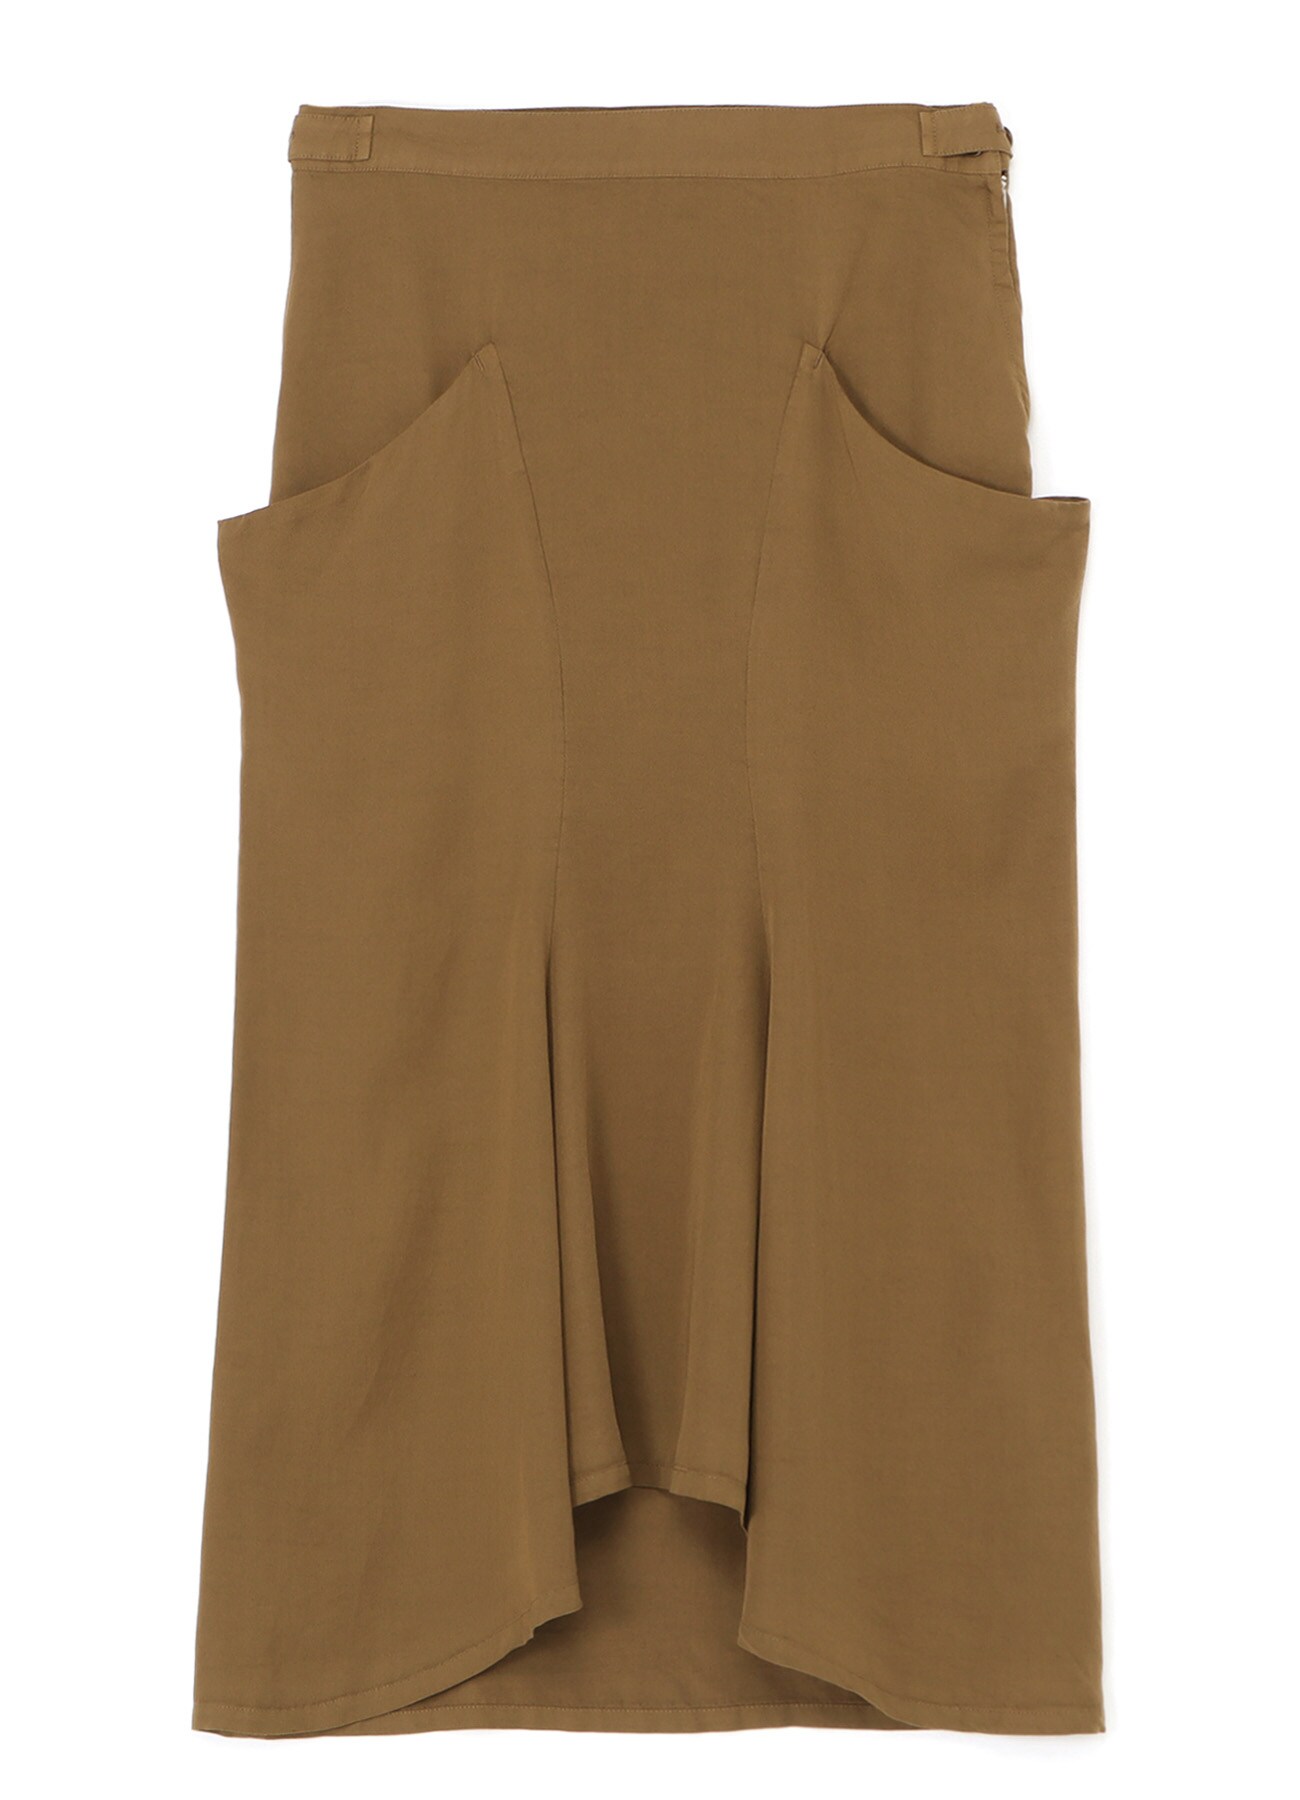 CELLULOSE TWILL GARMENT-DYED LONG POCKET SKIRT(XS Beige): Y's｜THE